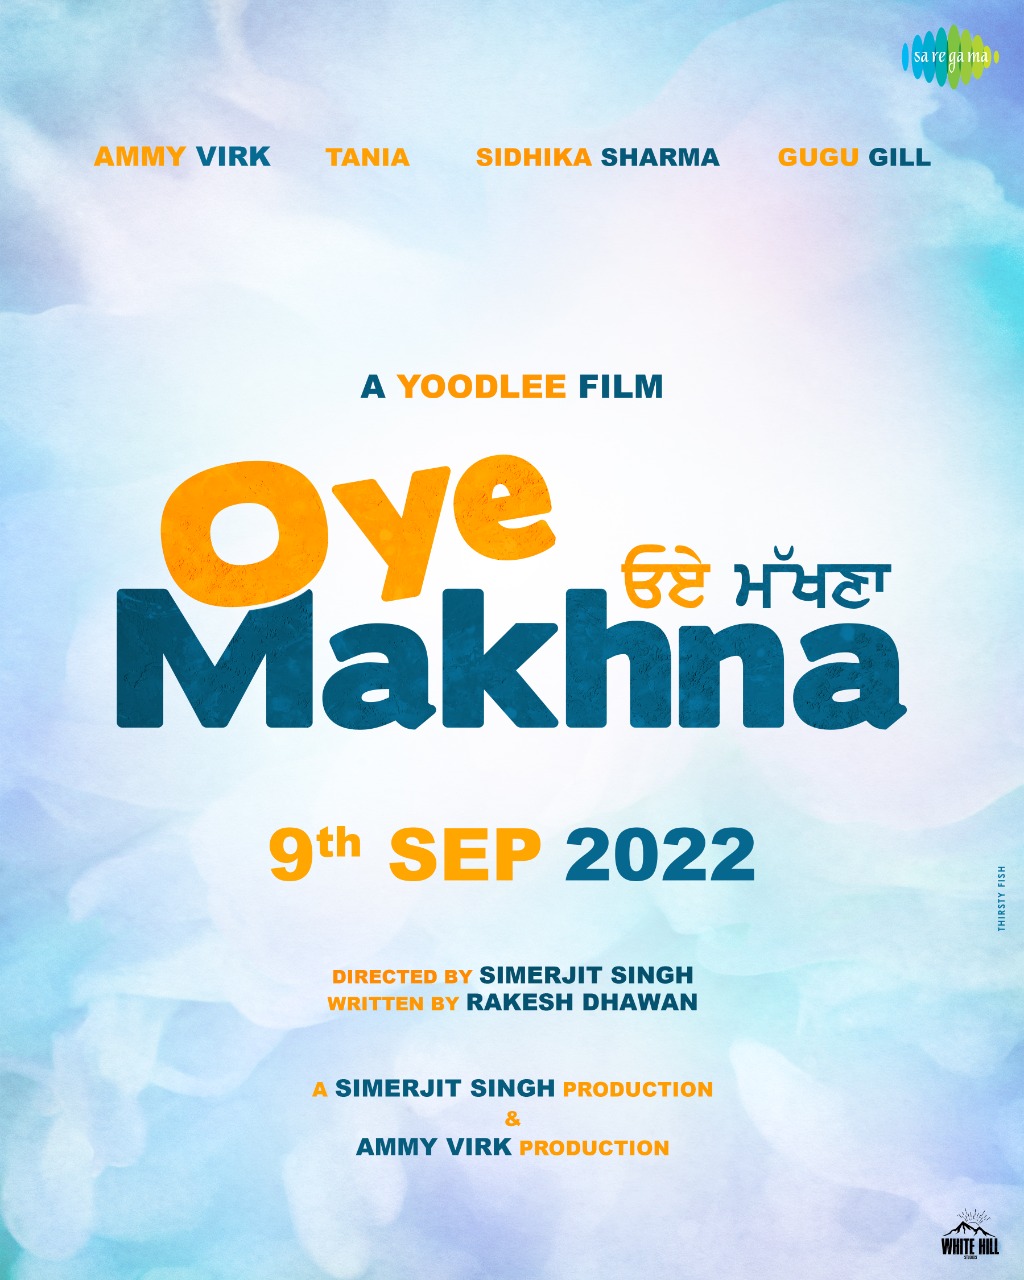 Oye Makhna Movie Poster ft ammy virk and tania